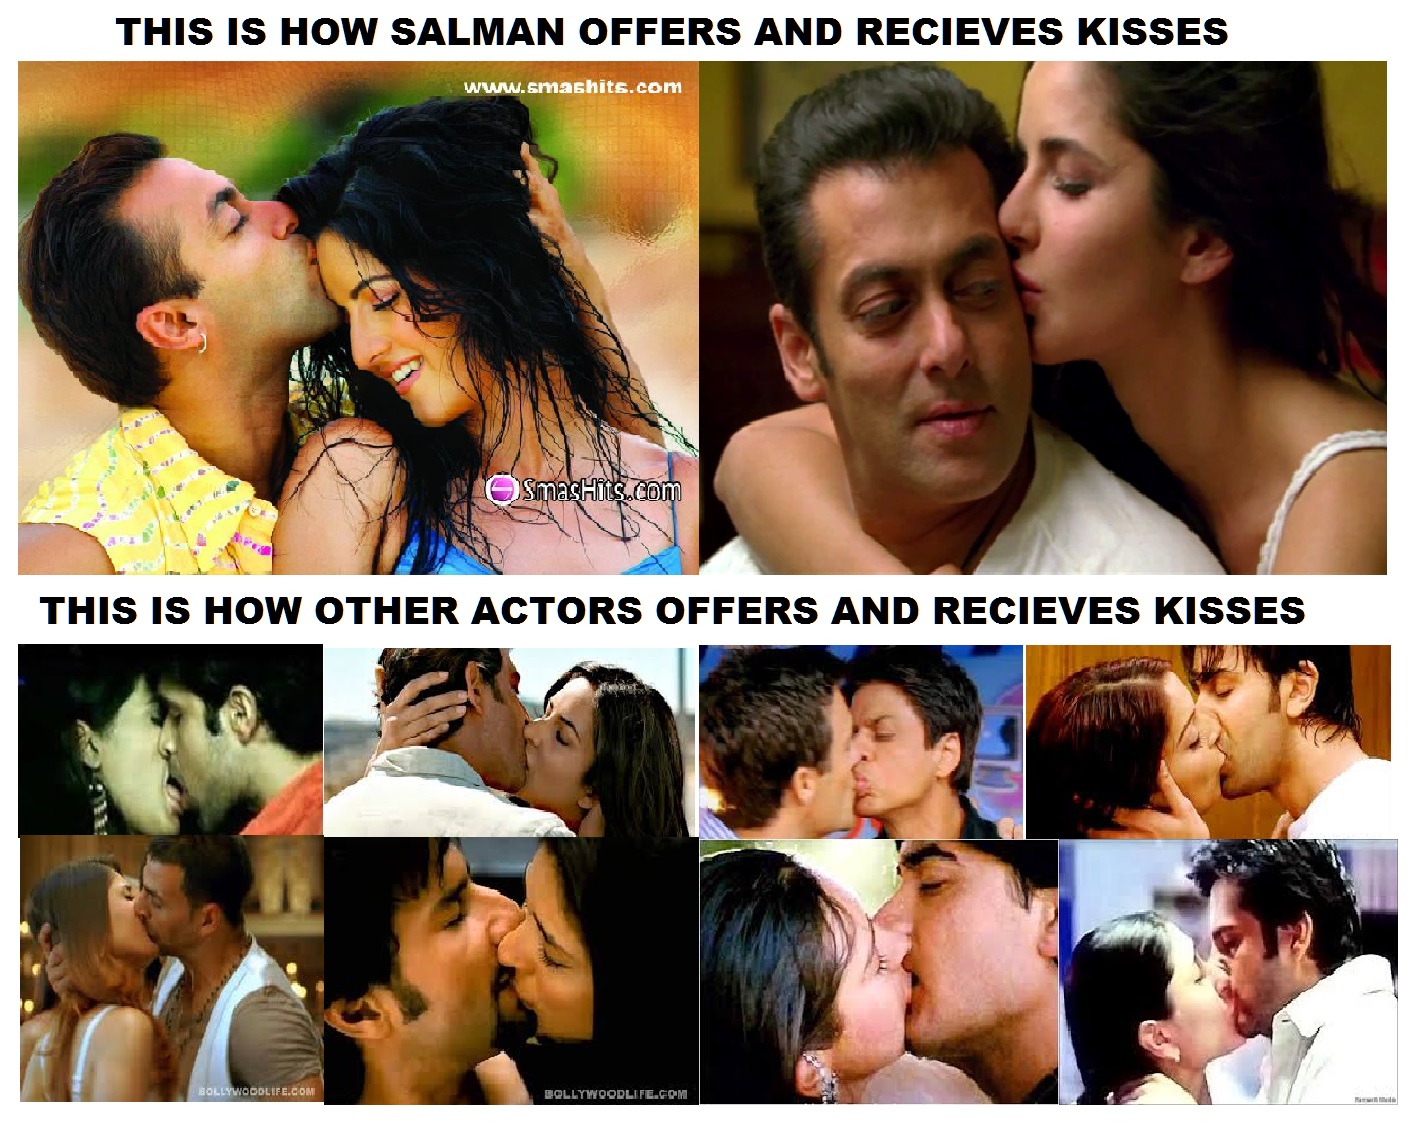 When Salman Khan is Simple, others are Explicit